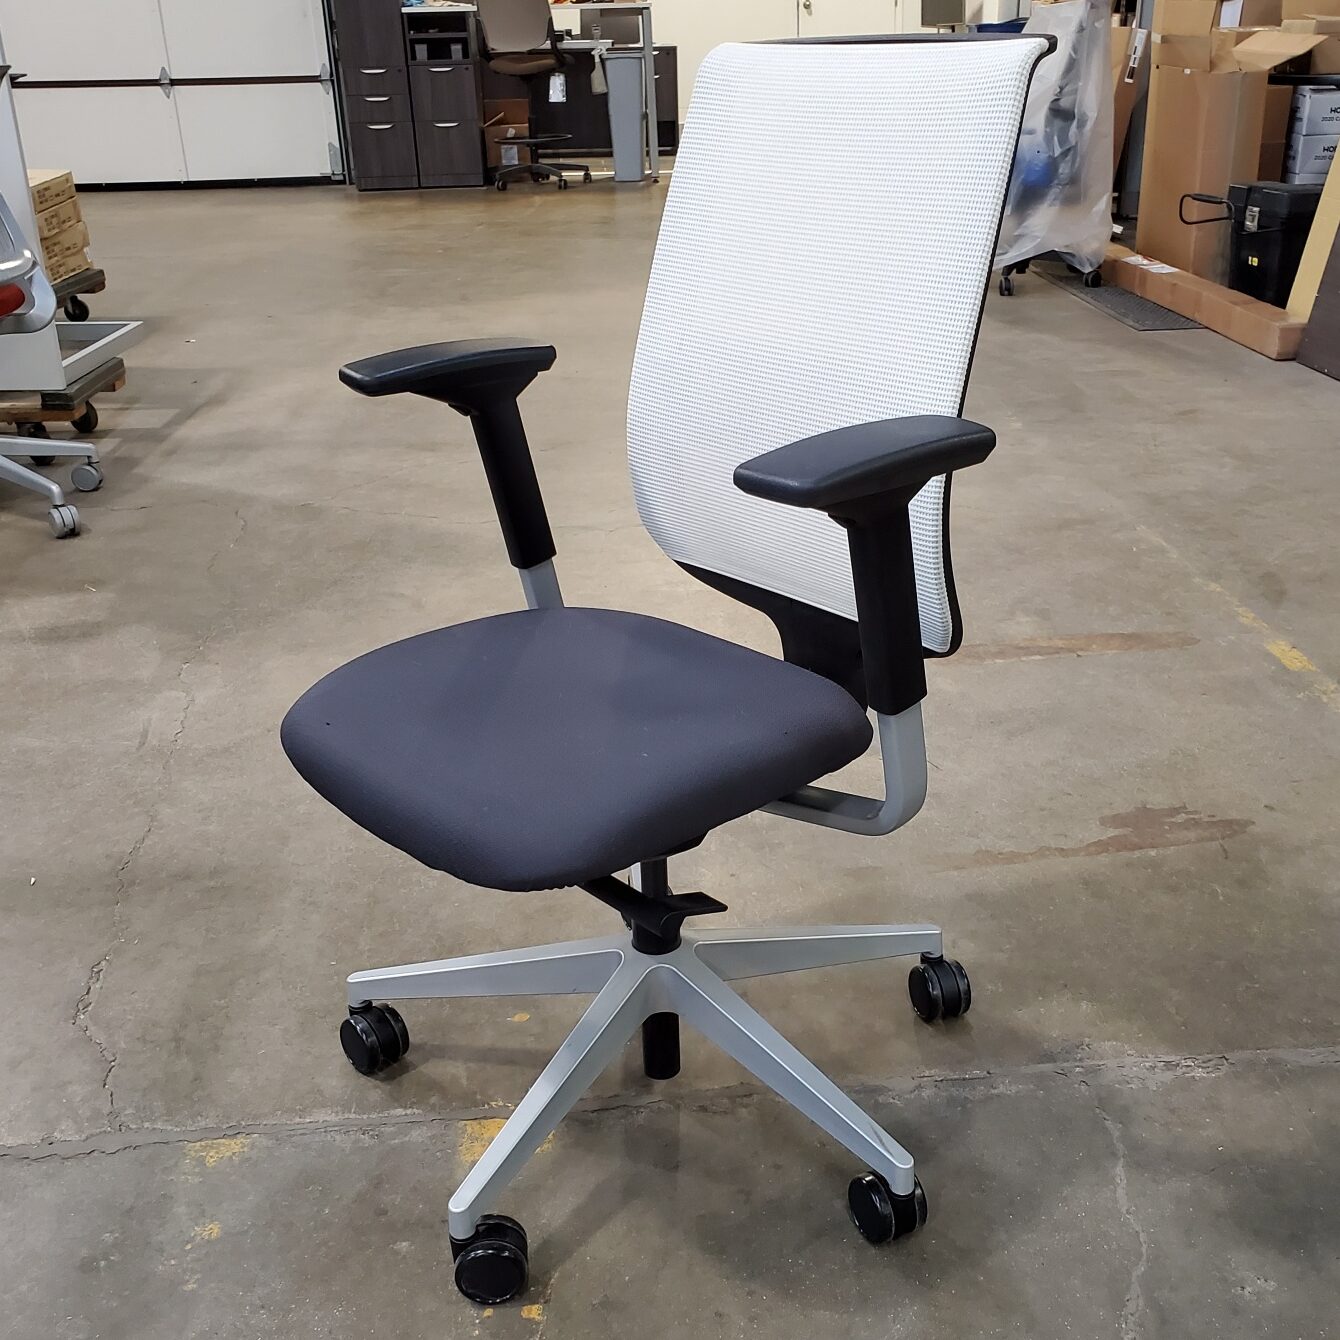 Steelcase Reply Chair